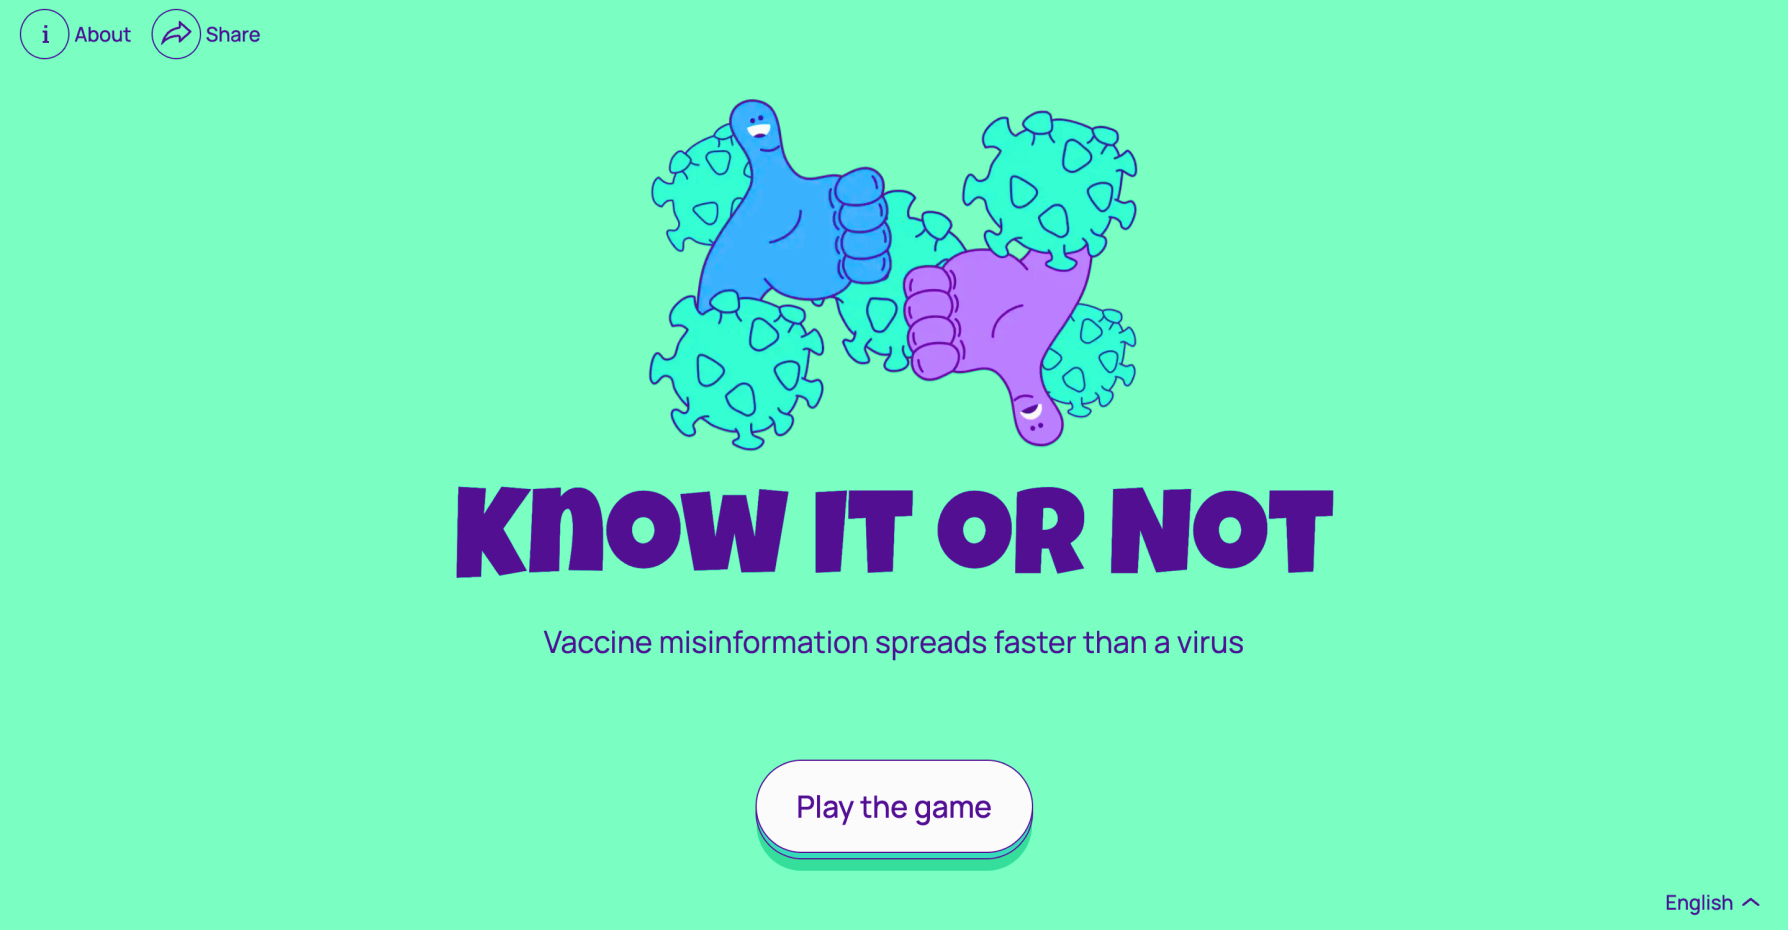 Screen capture of the game "Know it or Not" showing two opposing thumbs transposed on drawings of virus molecules.